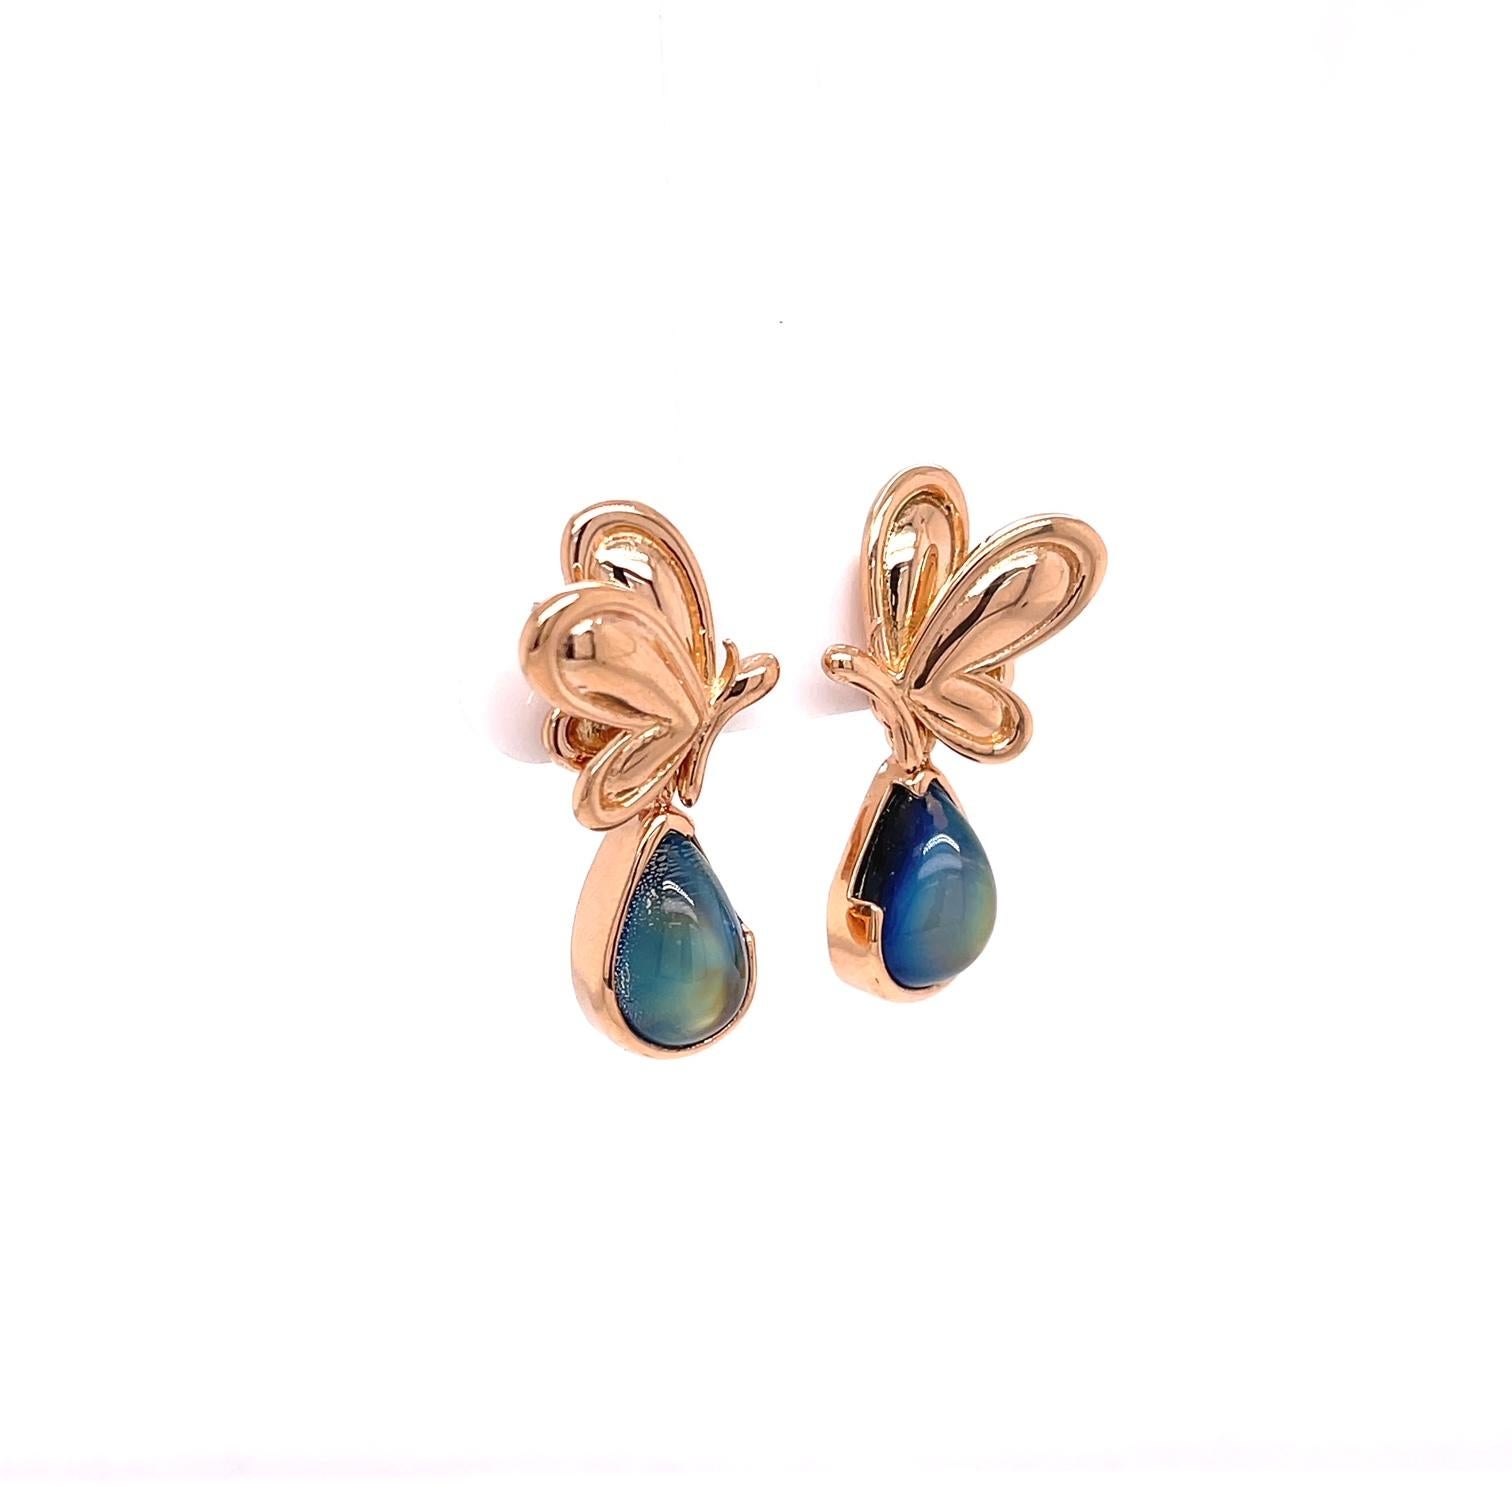 A pair of 18k rose gold butterfly studs with a pair of 18k rose gold jackets set with 8.31 total carats of rainbow moonstone pear shaped cabochons, 12.4mm x 8mm. These earrings were made and designed by llyn strong.
Items sold separately upon